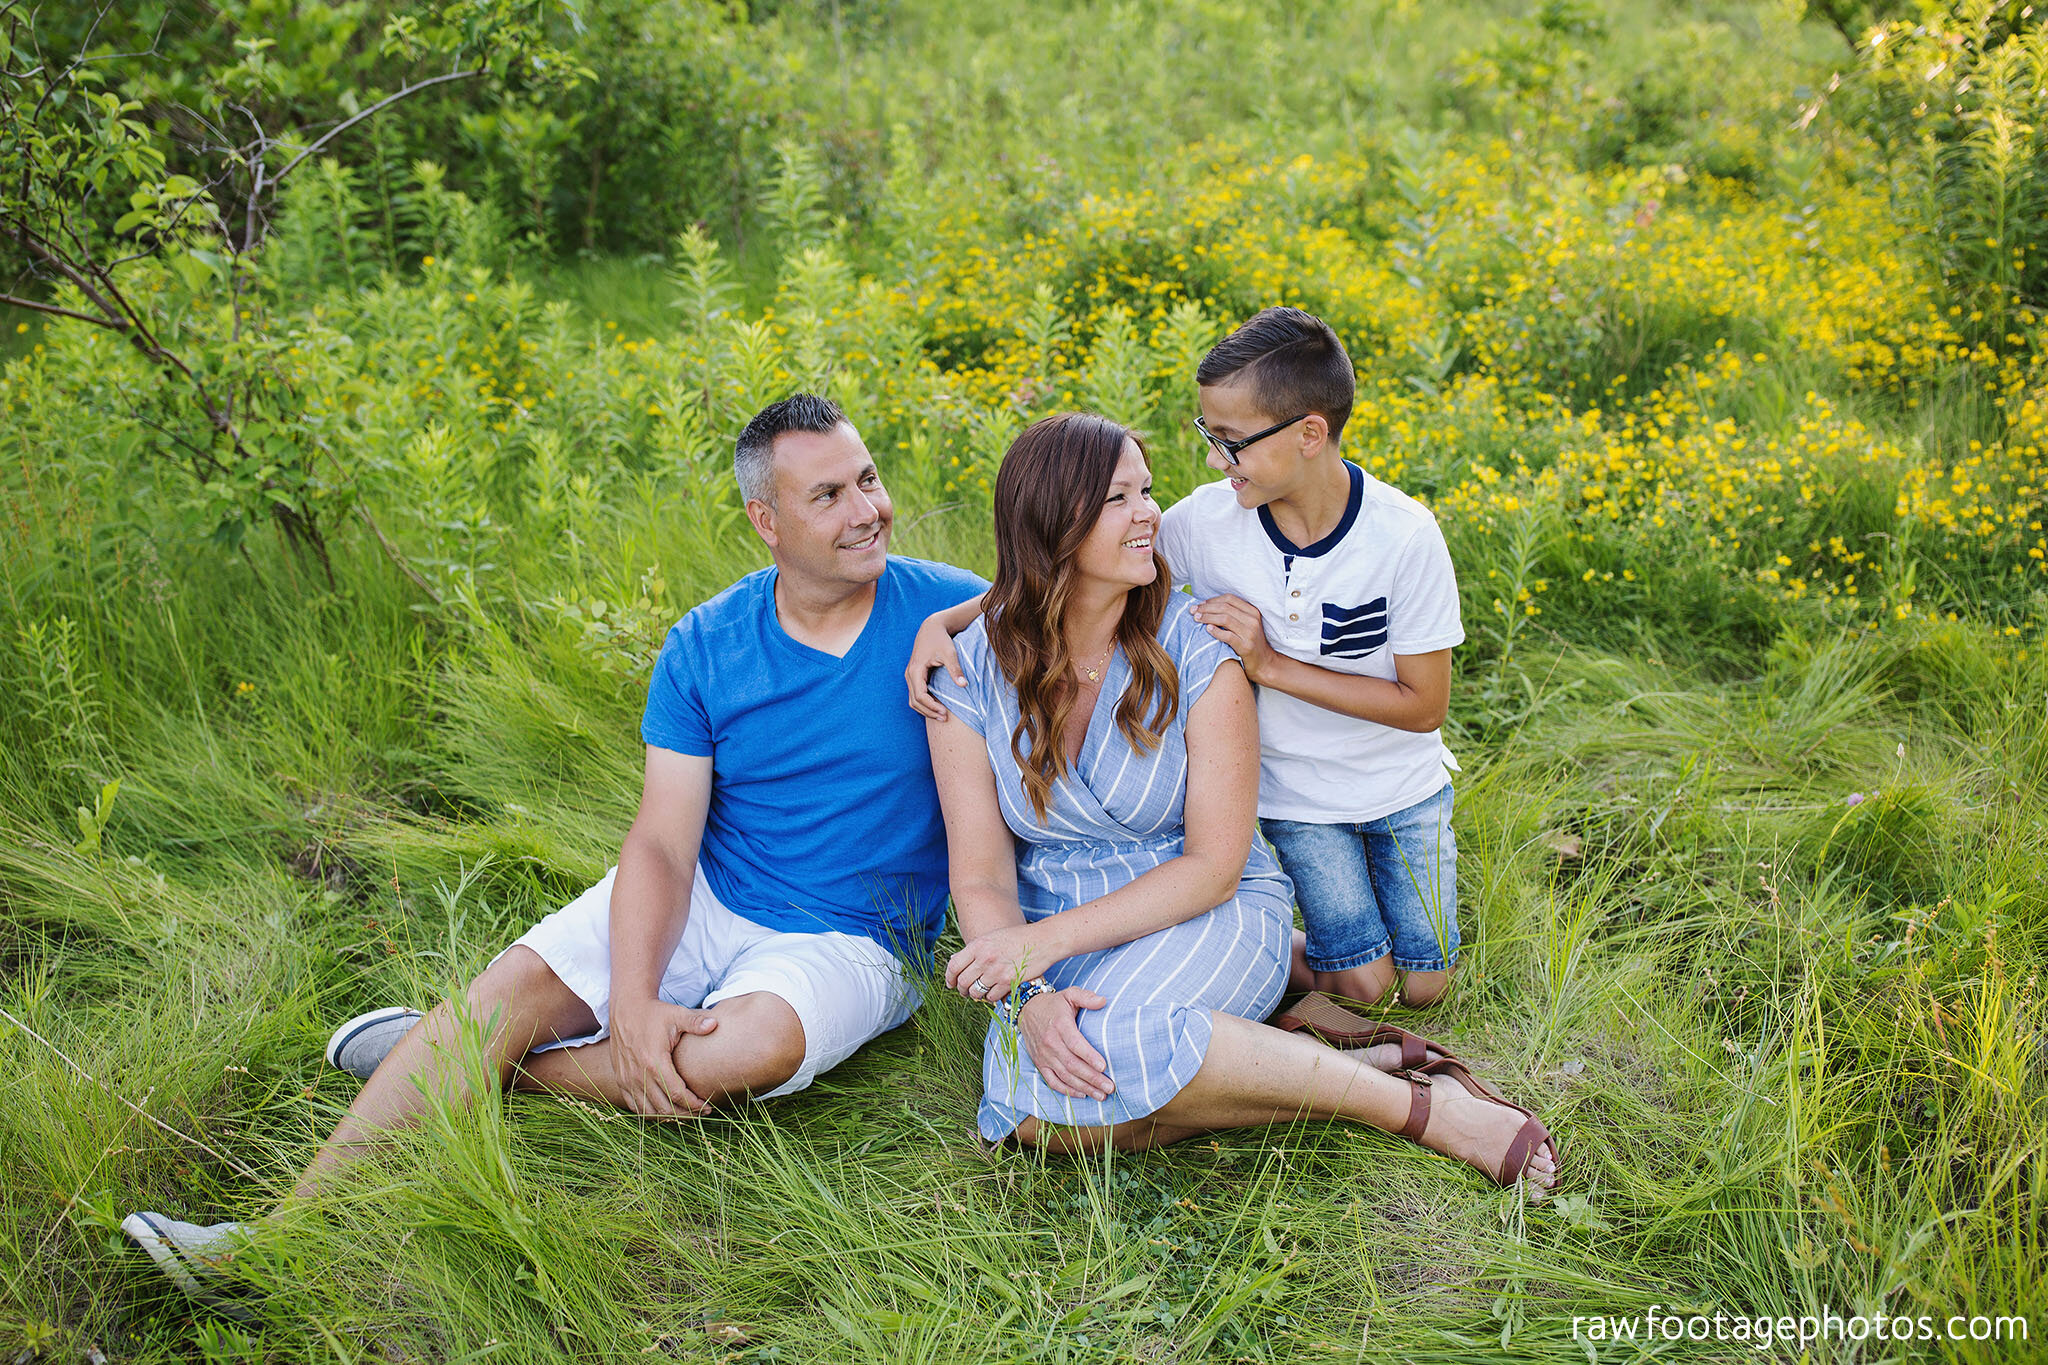 london_ontario_family_photographer-extended_family_session-grandparents-cousins-backyard_session-civic_gardens-raw_footage_photography-007.jpg